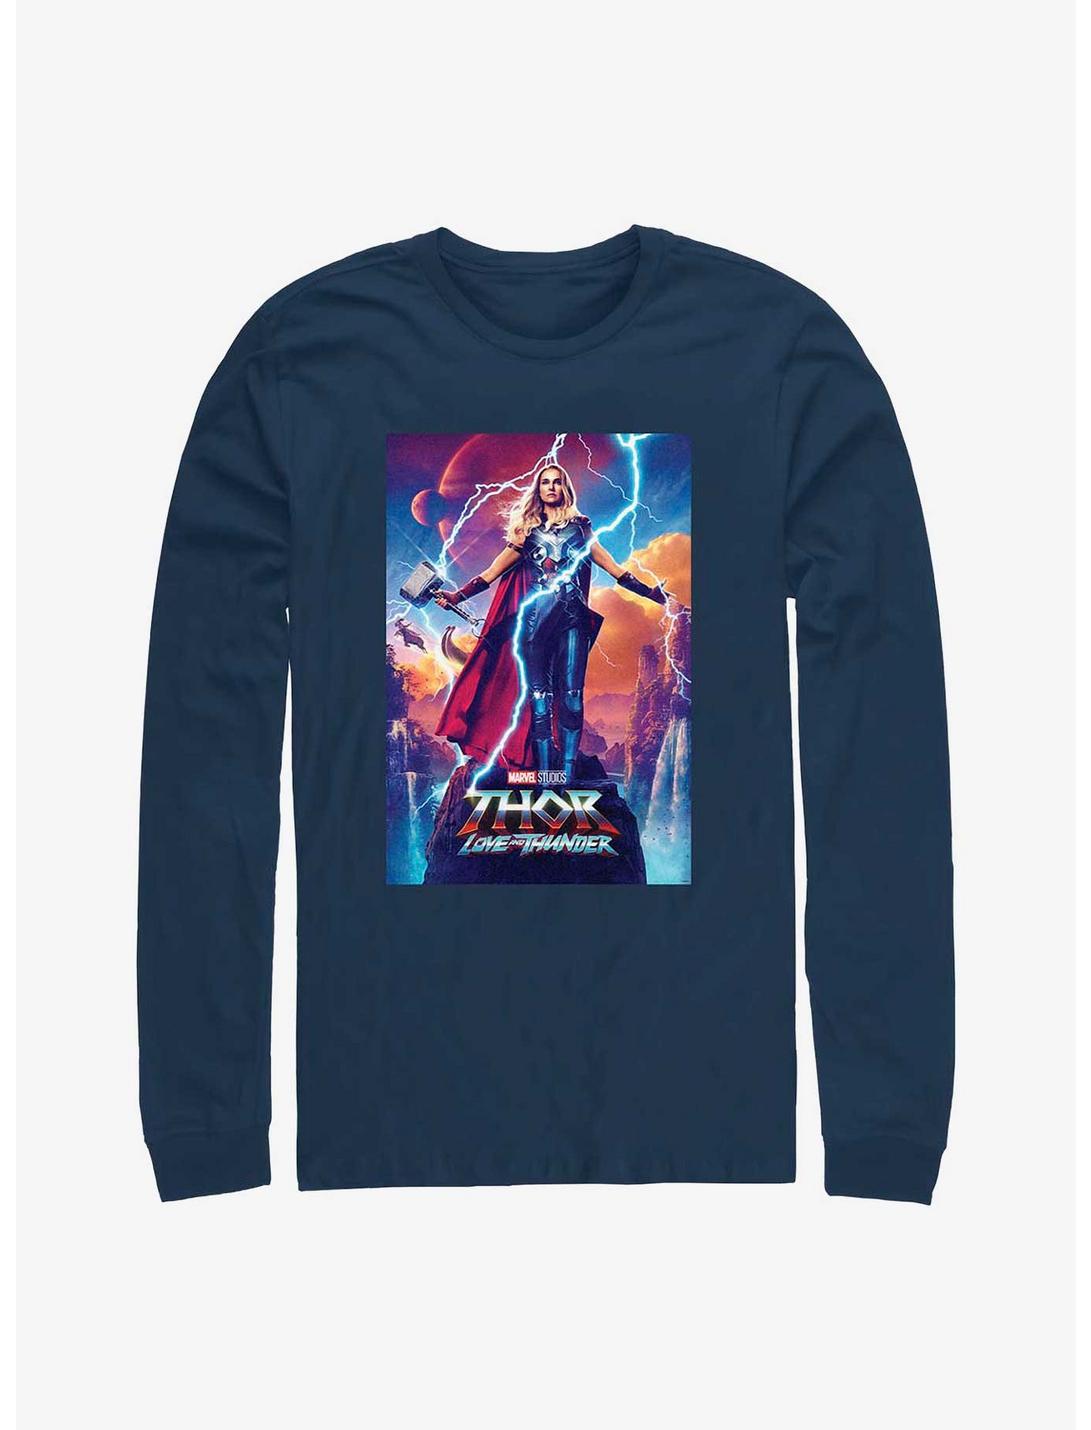 Marvel Thor: Love and Thunder Mighty Thor Movie Poster Long-Sleeve T-Shirt, NAVY, hi-res